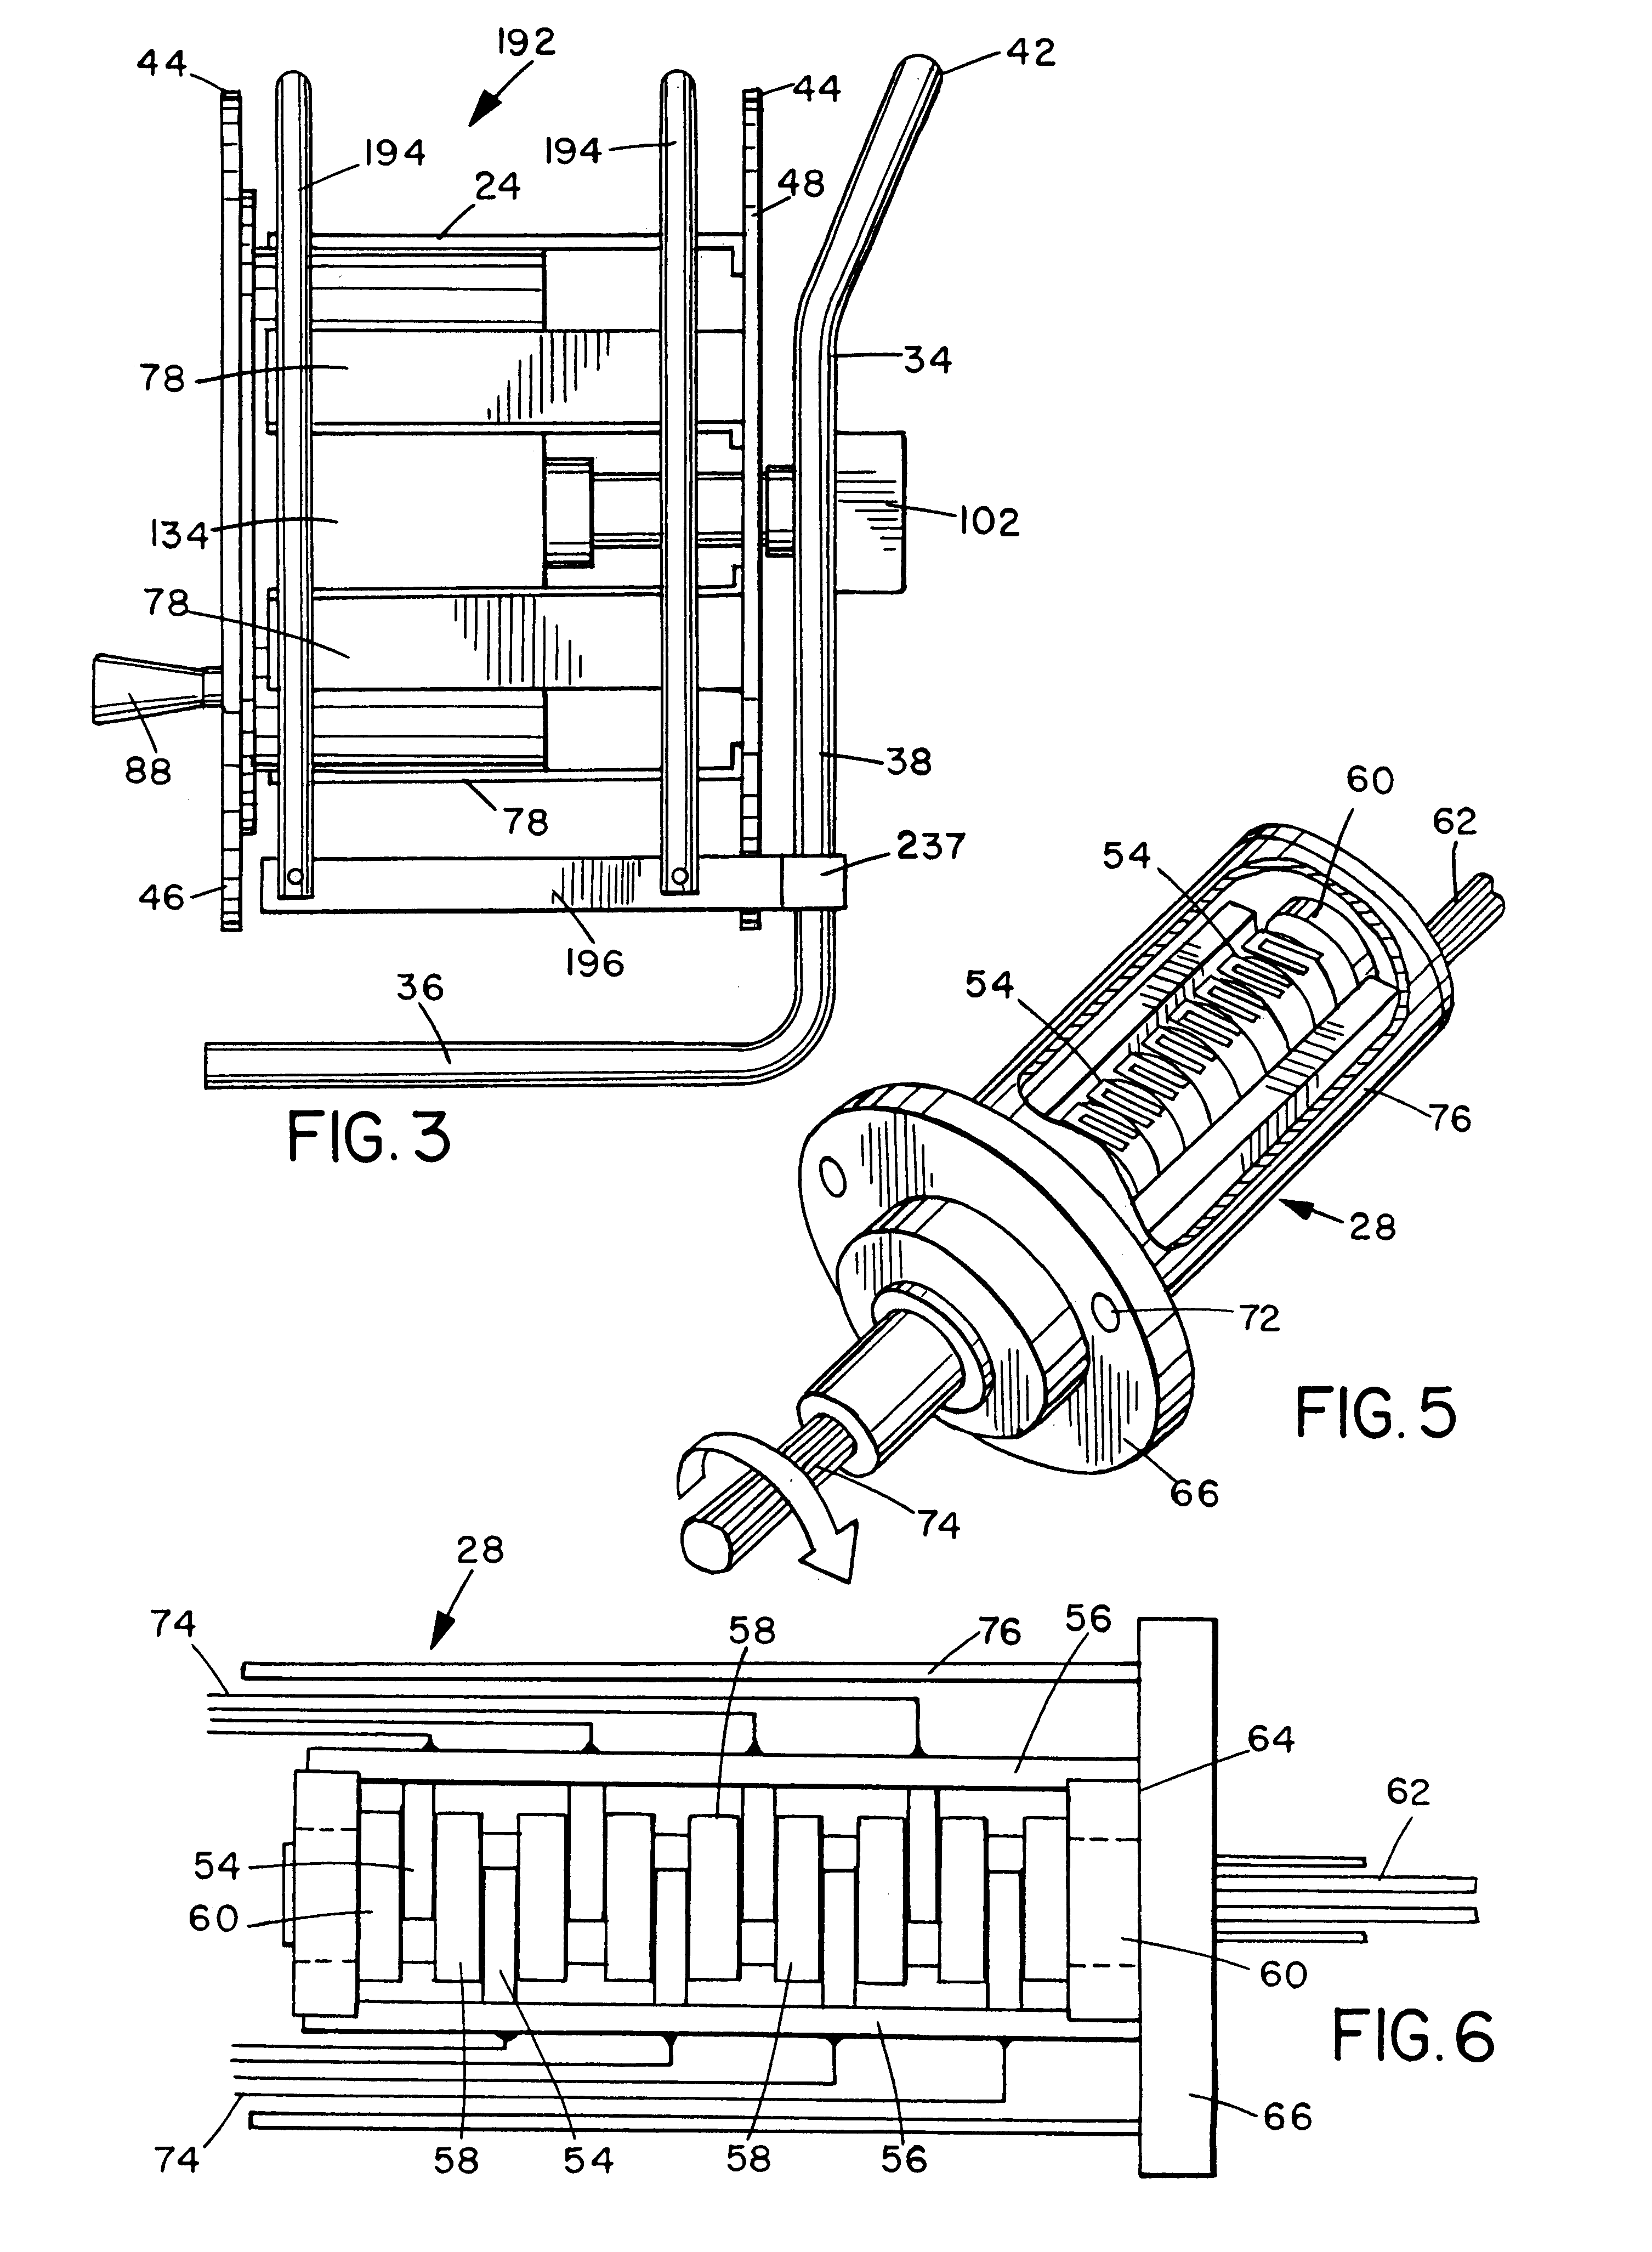 Cable reel having slip ring capsule and overwinding protection